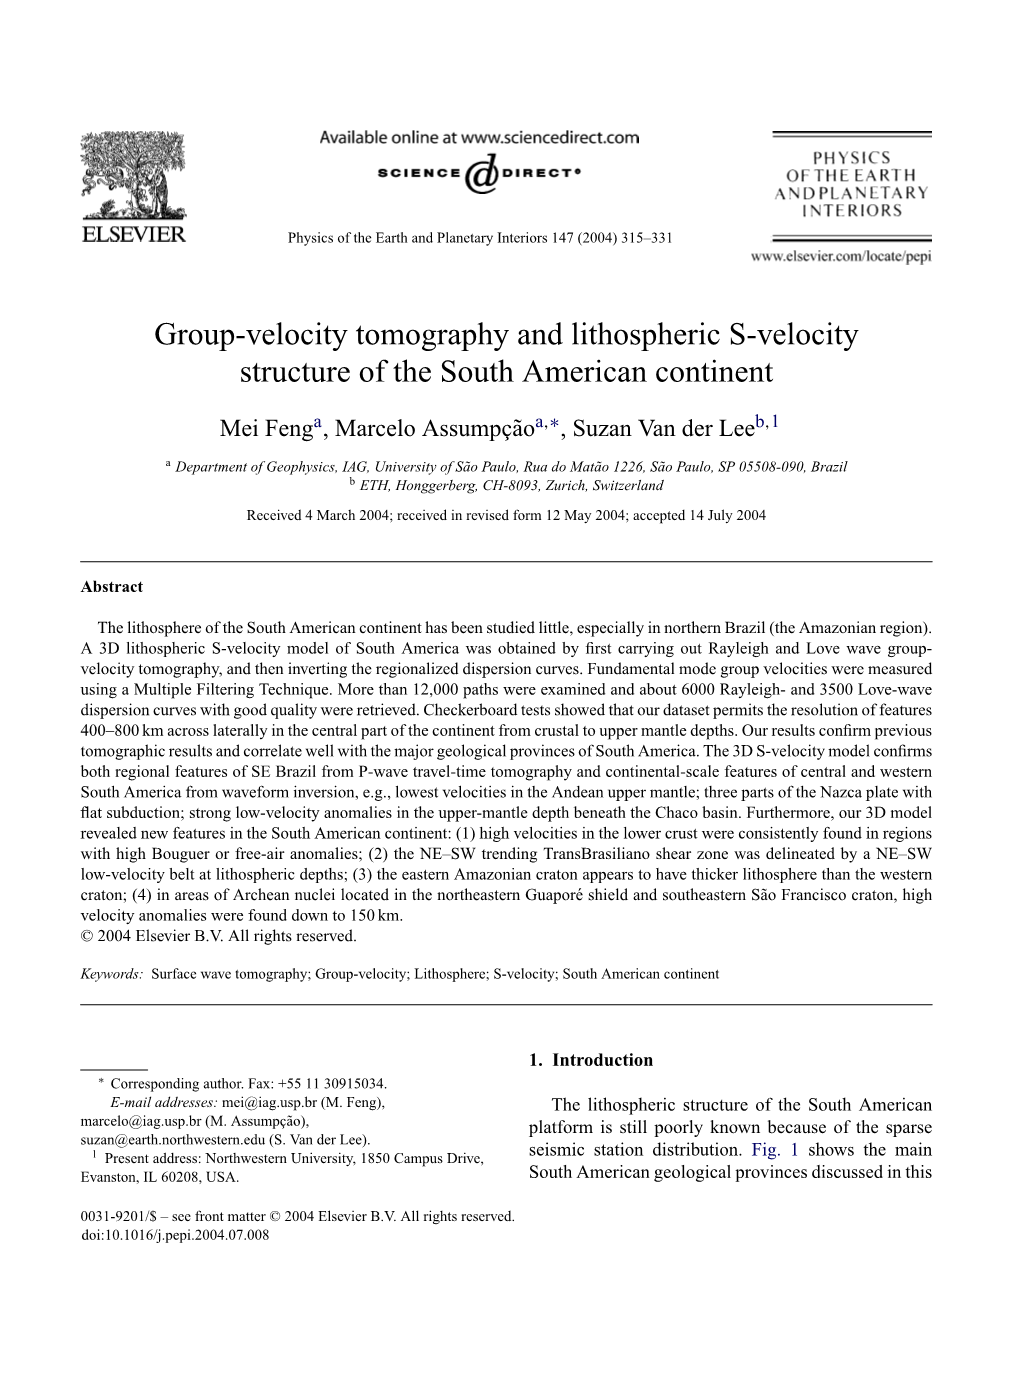 Group-Velocity Tomography and Lithospheric S-Velocity Structure of the South American Continent